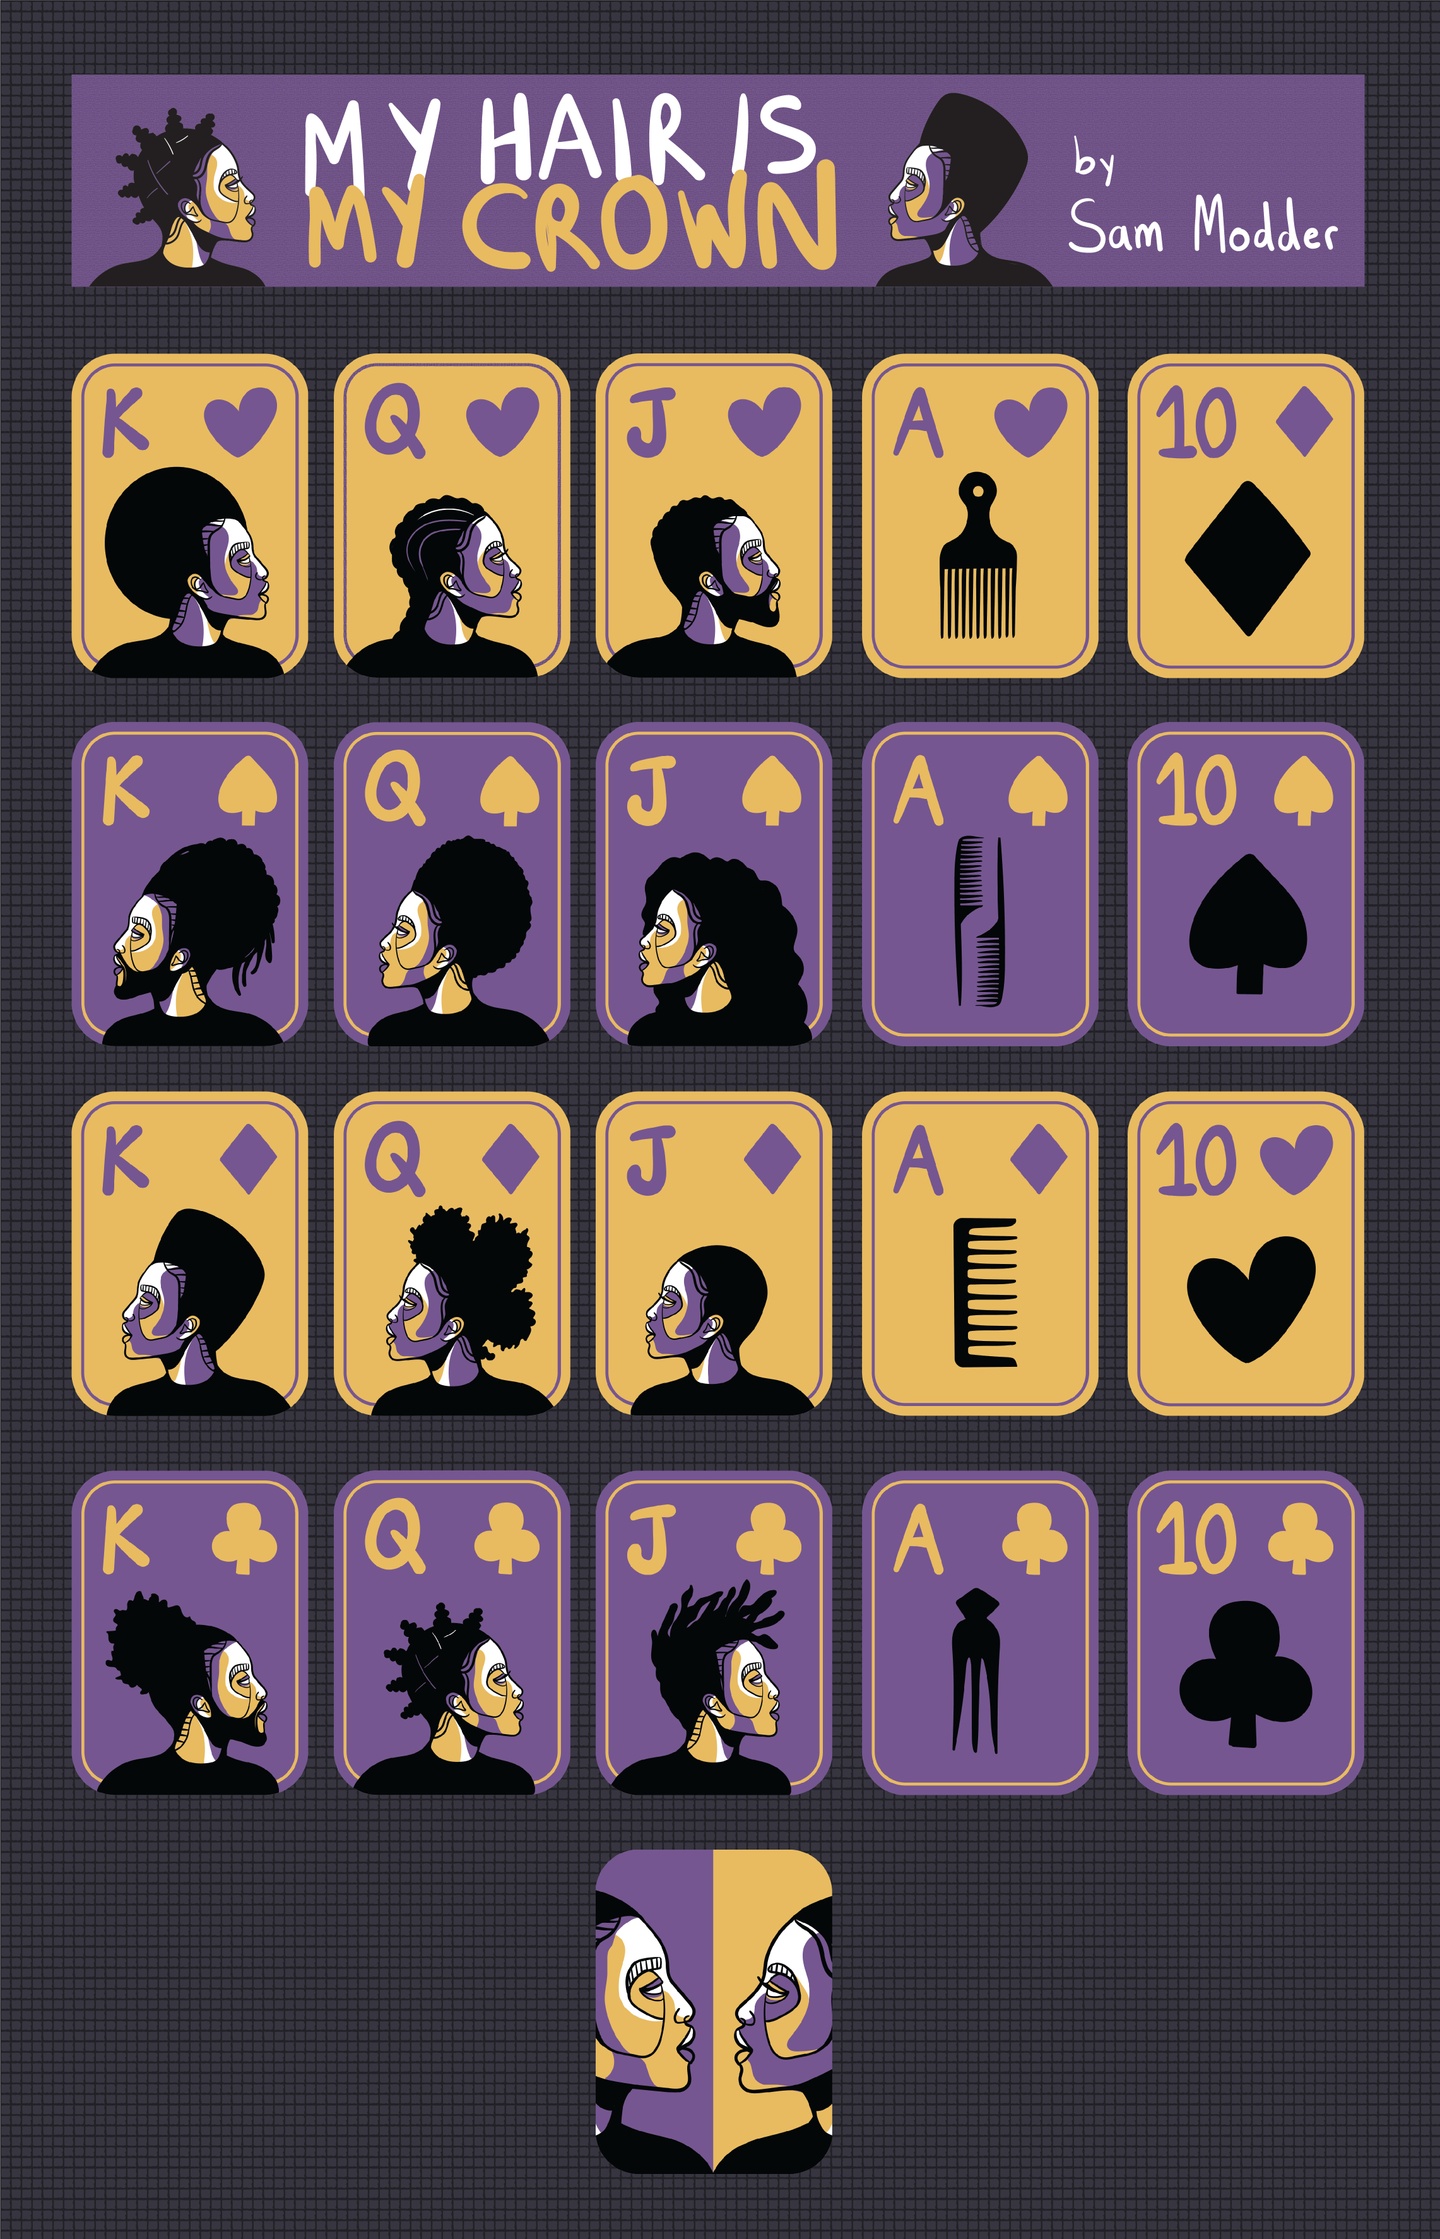 A deck of cards with yellow and purple backgrounds. Each card shows a single head in profile with a different hairstyle. Across the top is a banner that reads "My Hair is My Crown" by Sam Modder. 